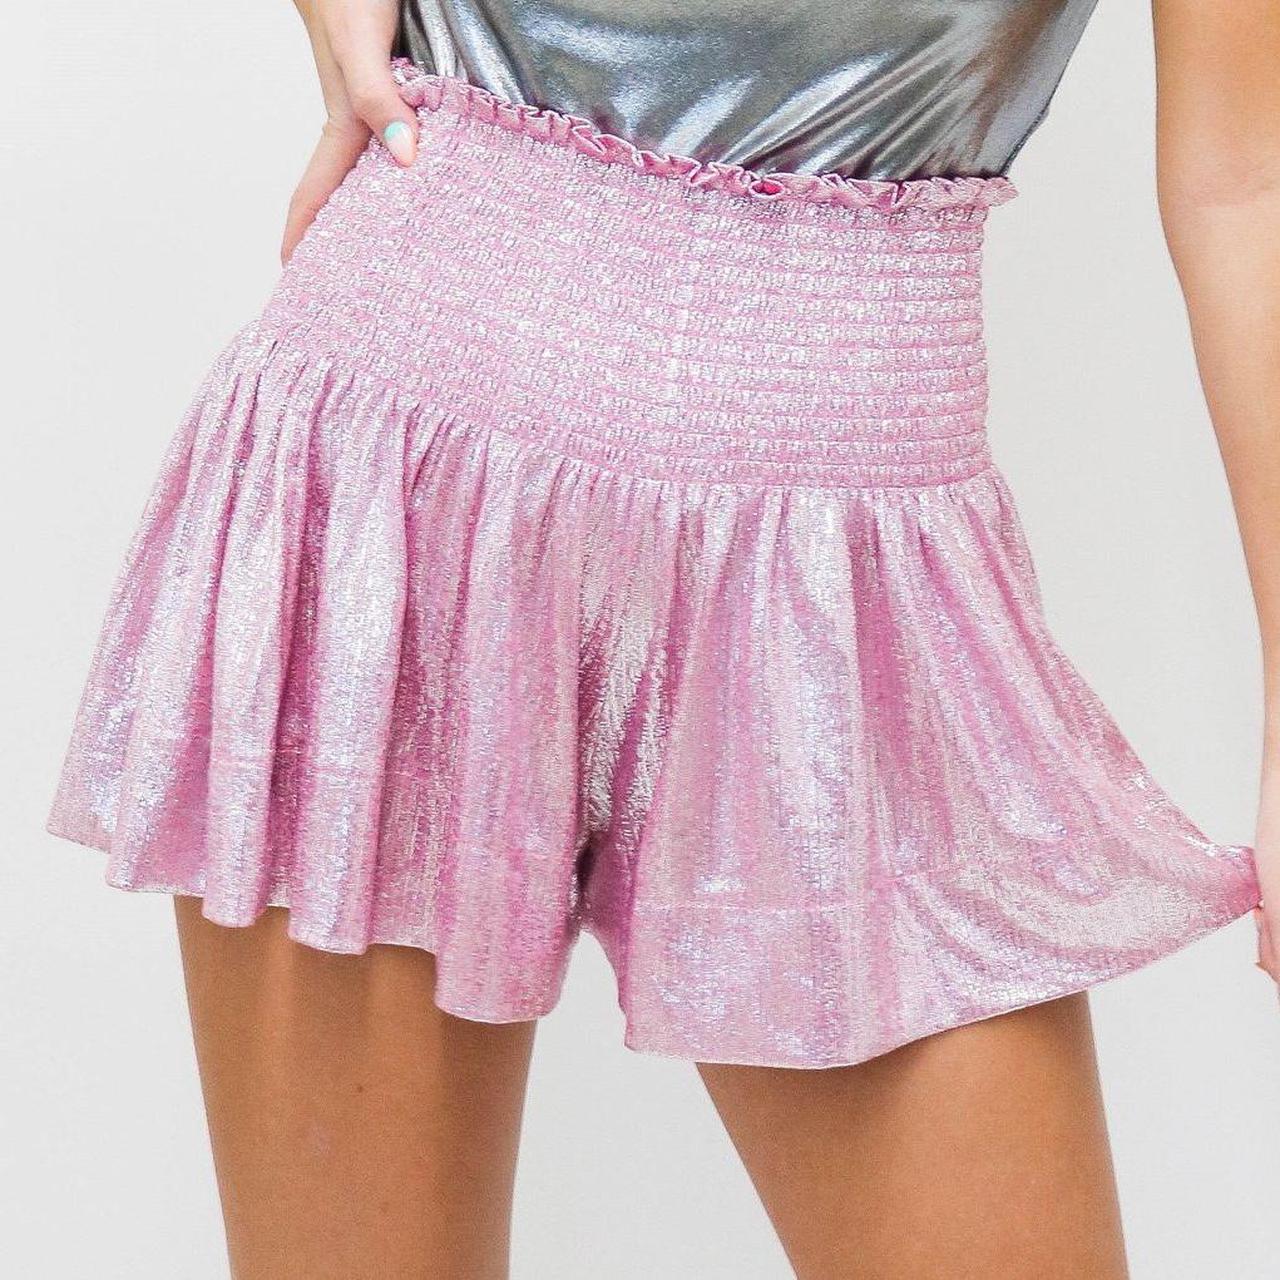 Queen of Sparkles pink holographic shorts. Perfect... - Depop